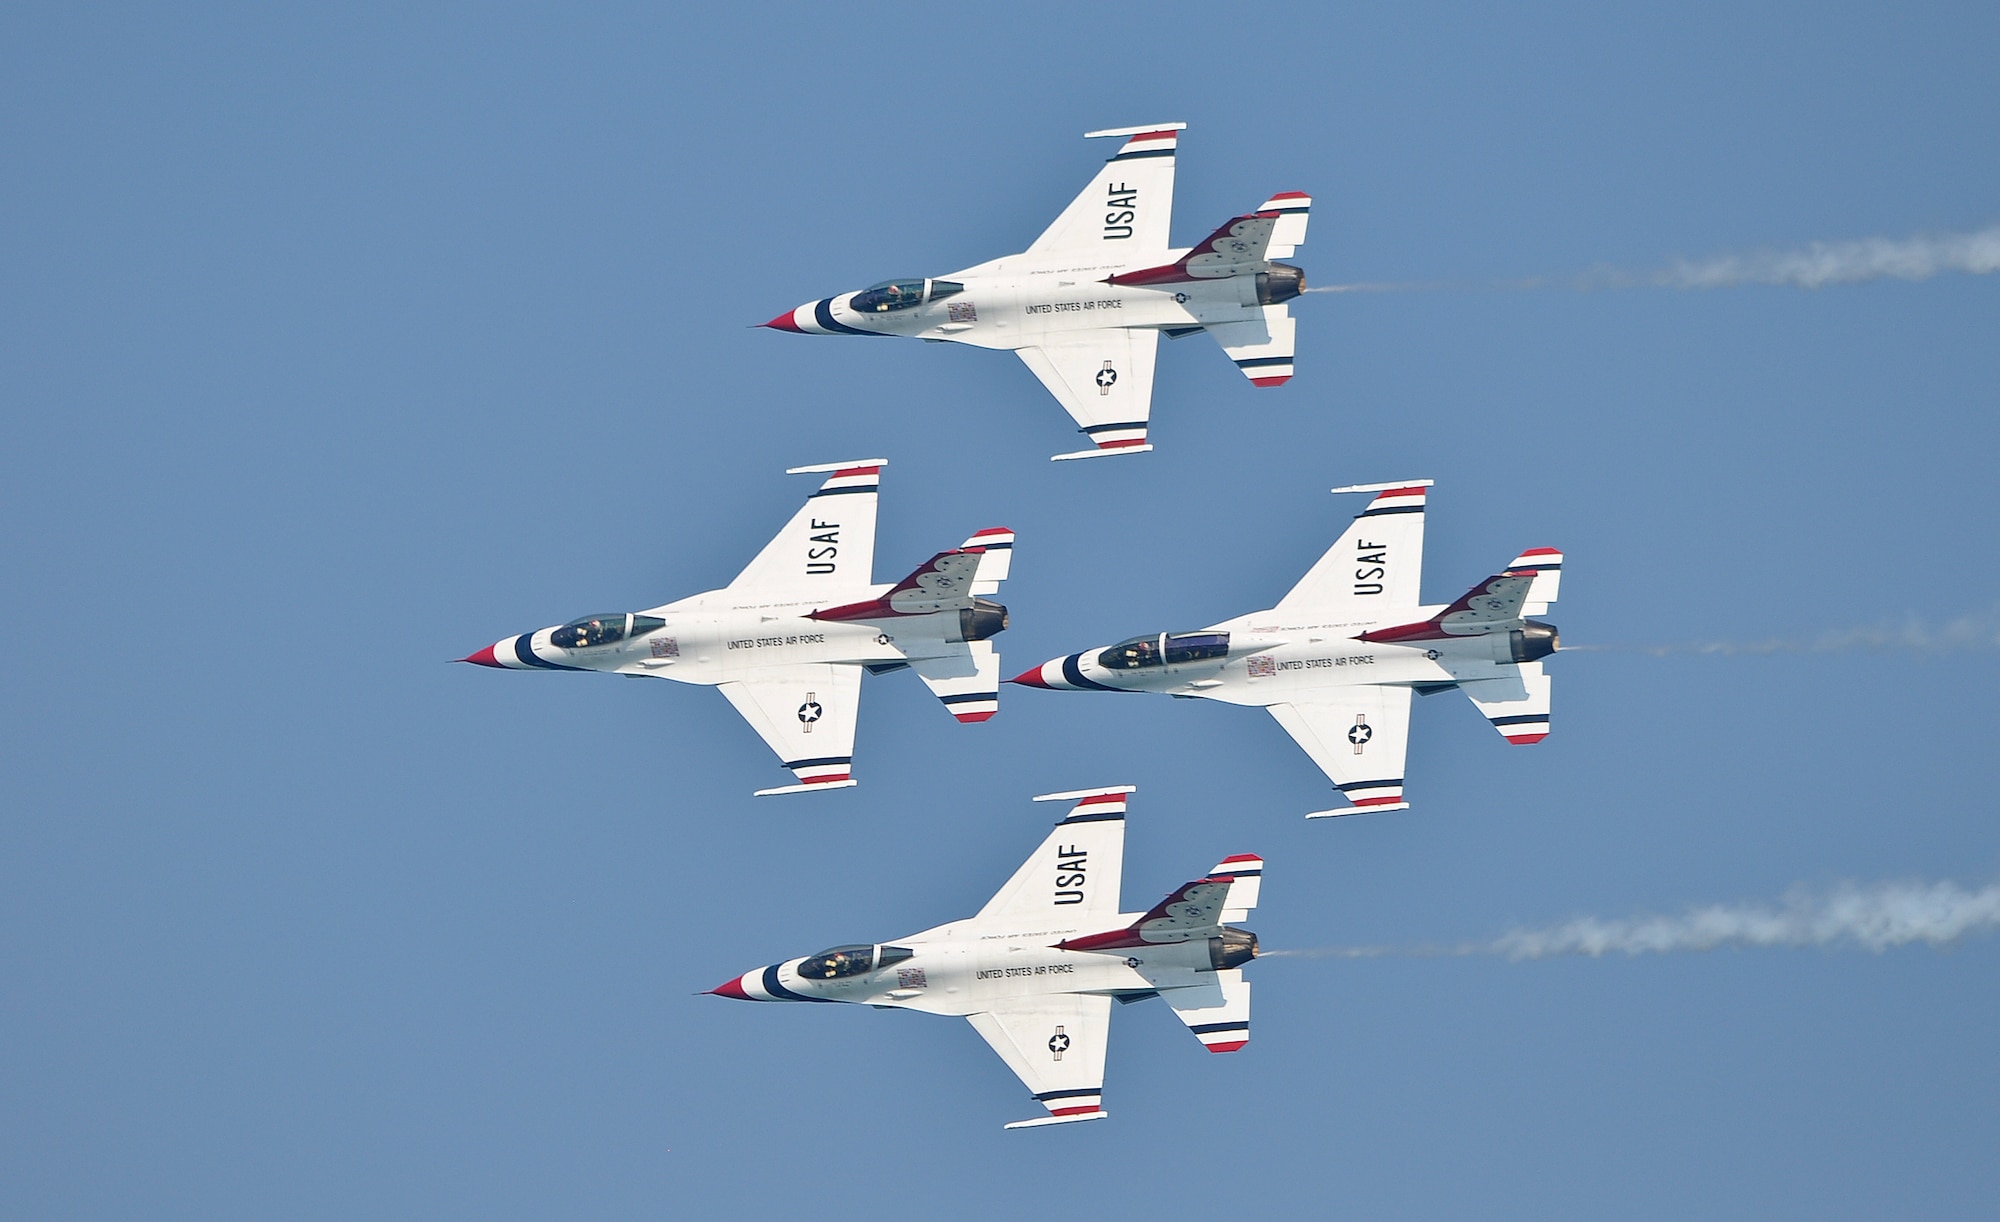 The Thunderbirds fly in a diamond formation over Bradford Beach during the 2011 Milwaukee Air and Water Show on Saturday, August 6.  The air show took place Saturday and Sunday, and the Thunderbirds flew both days.  (U.S. Air Force photo by Staff Sgt. Jeremy Wilson / Released)